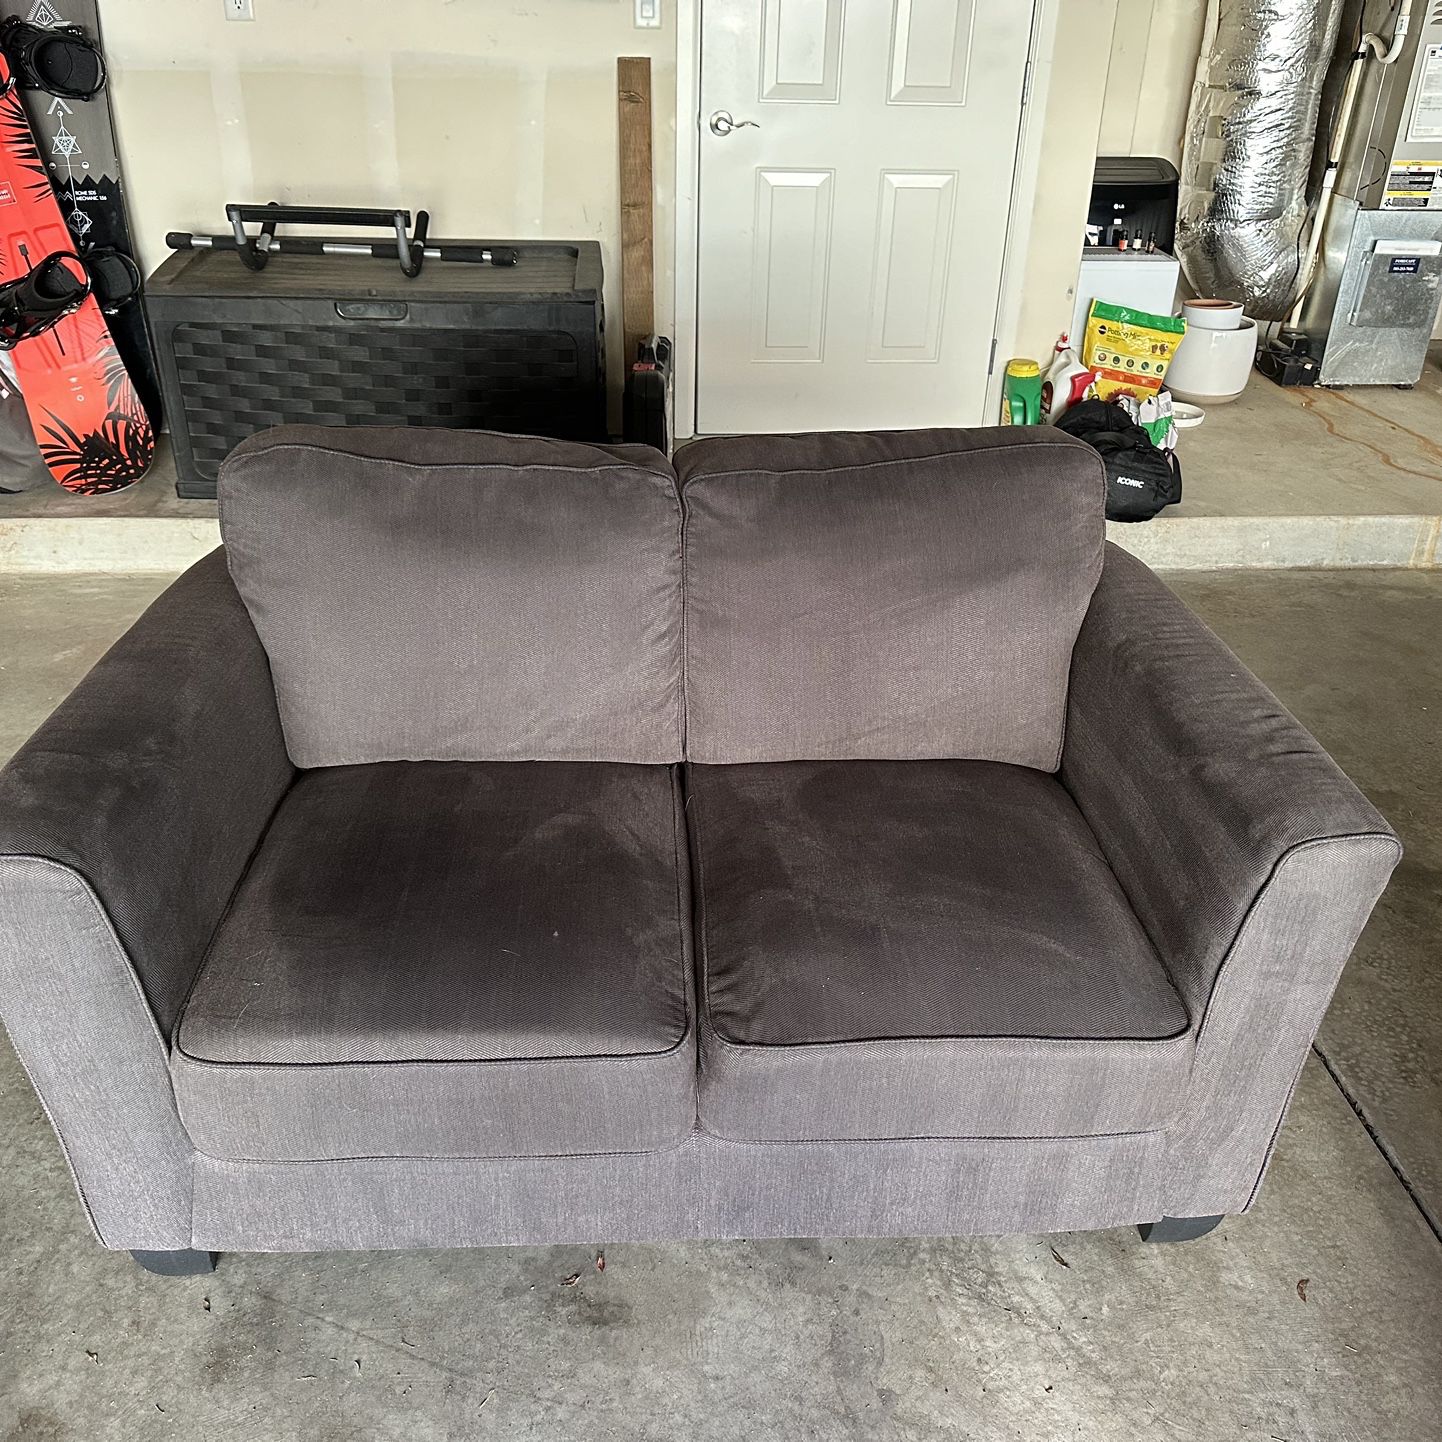 Couch Set For Sale $75